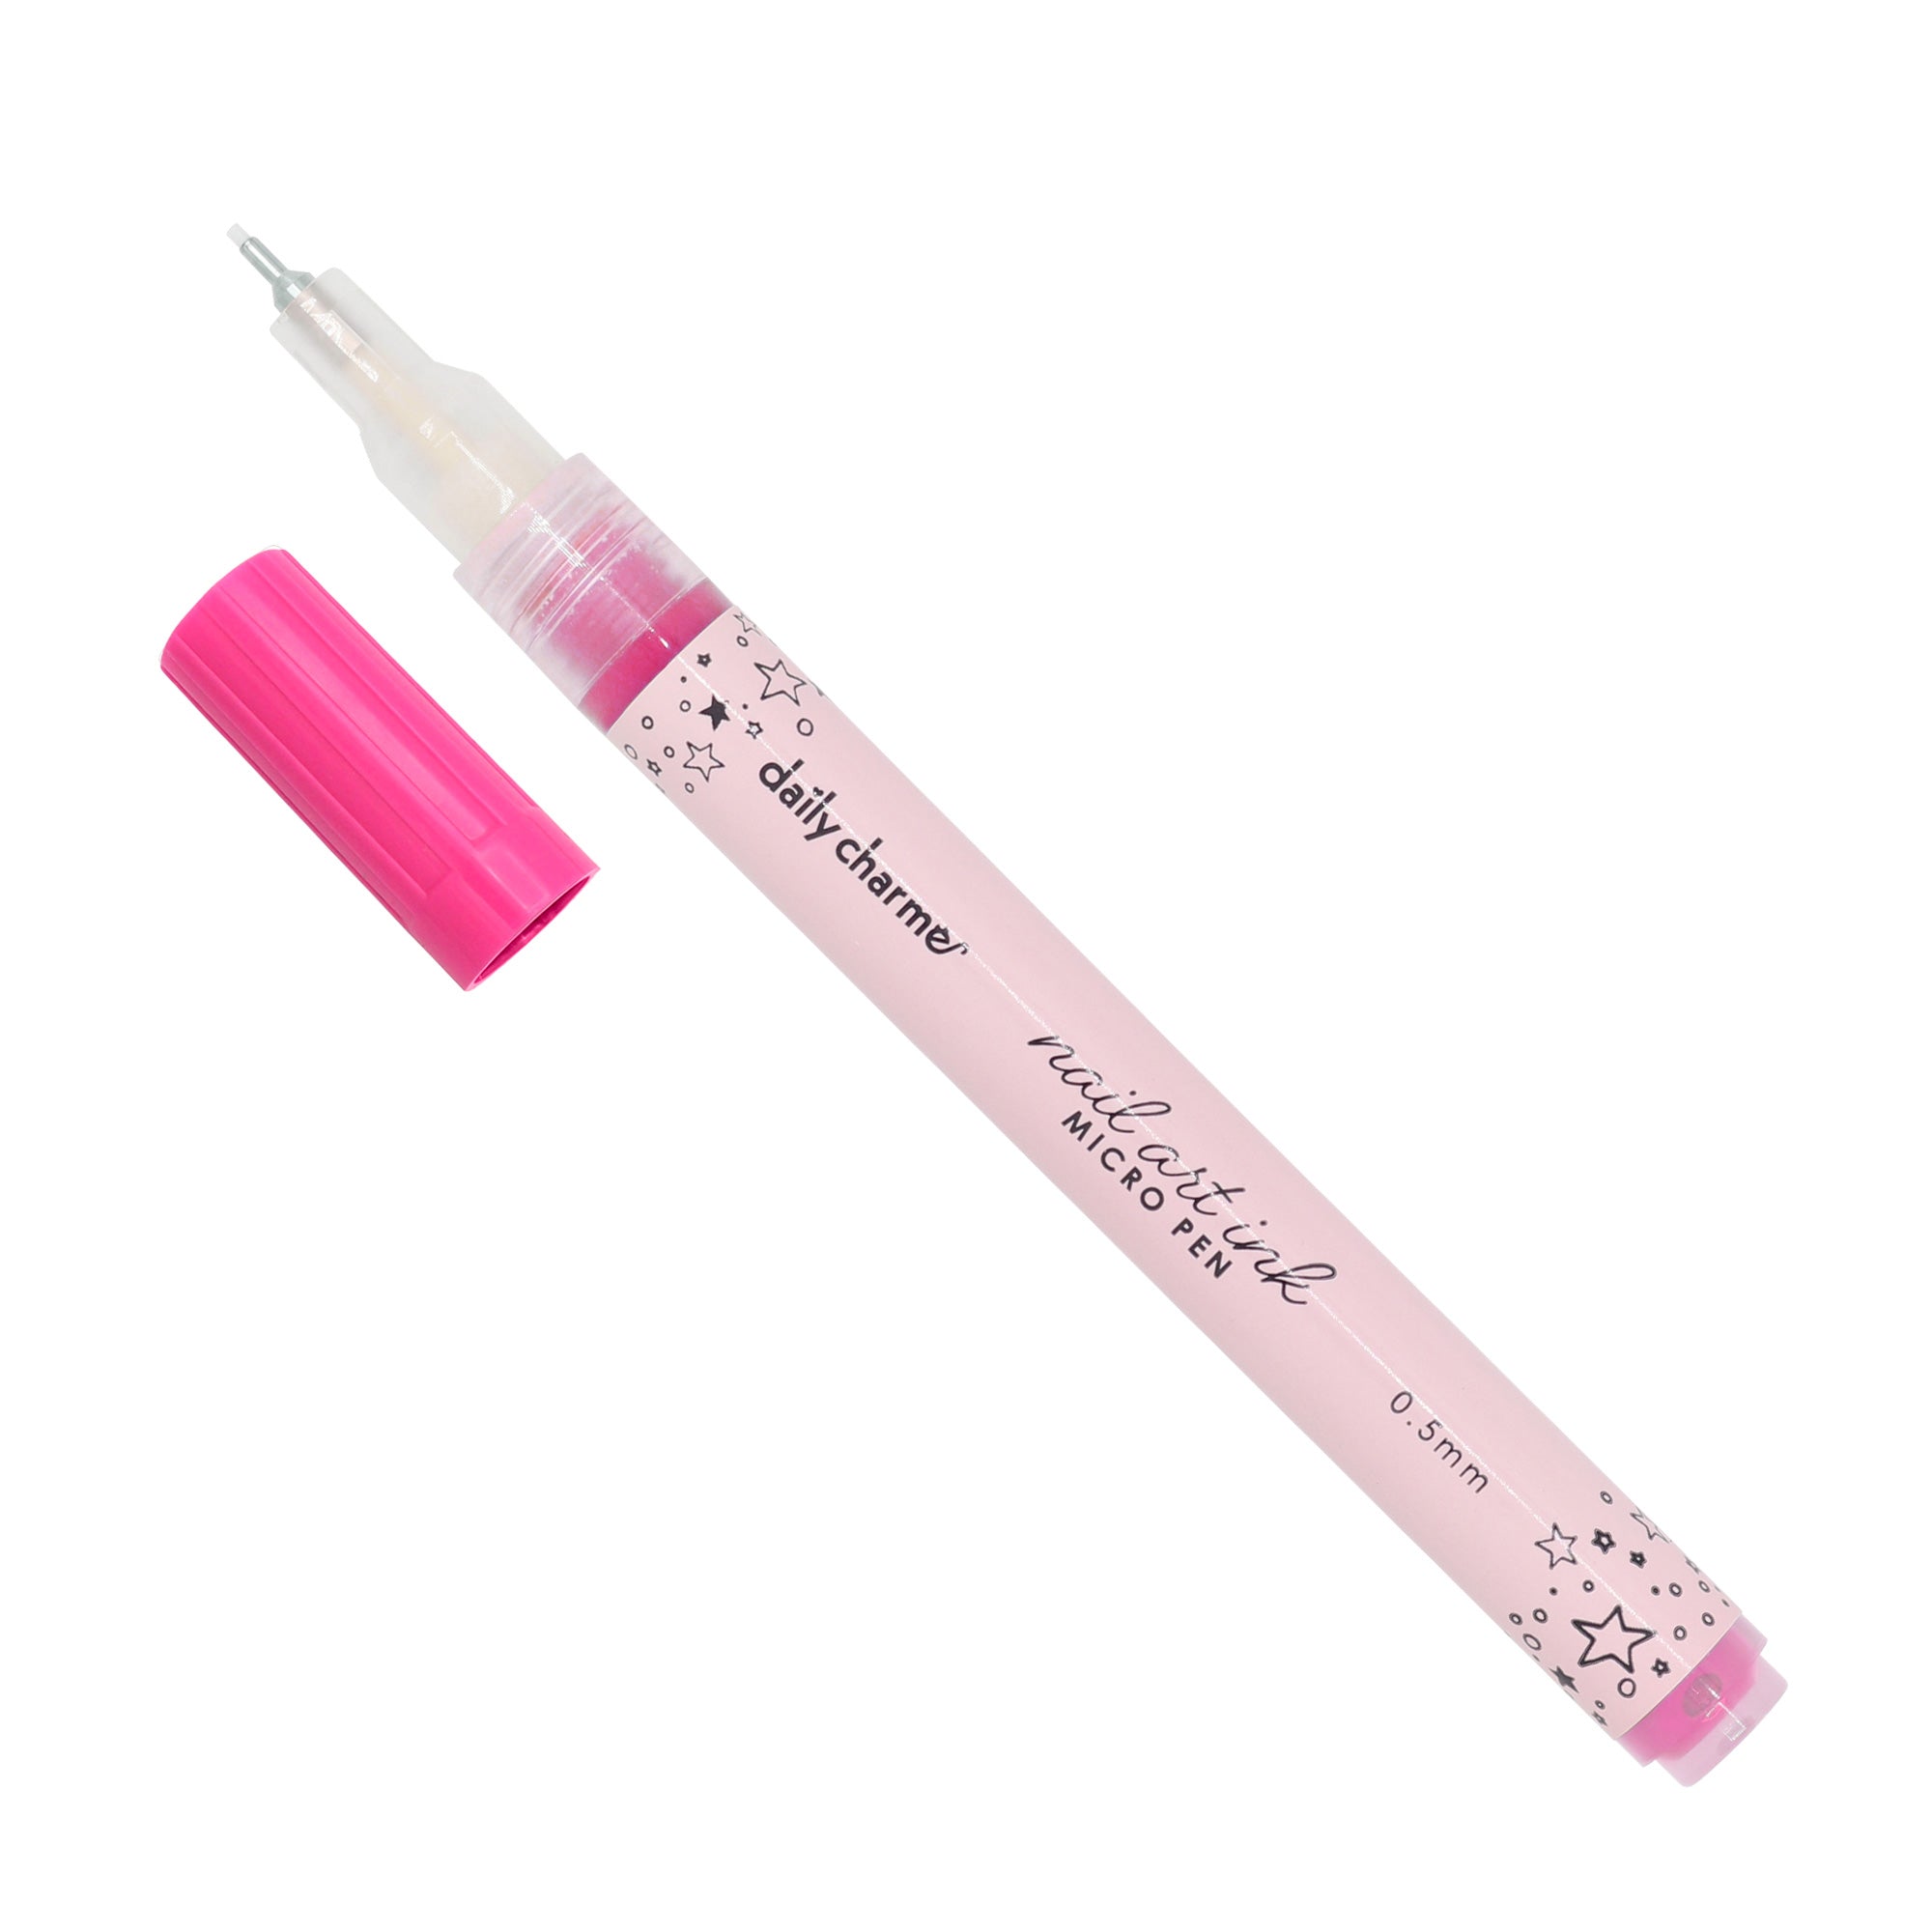 Nail Art Ink Micro Pen / Pink 0.5mm Fine Point – Daily Charme